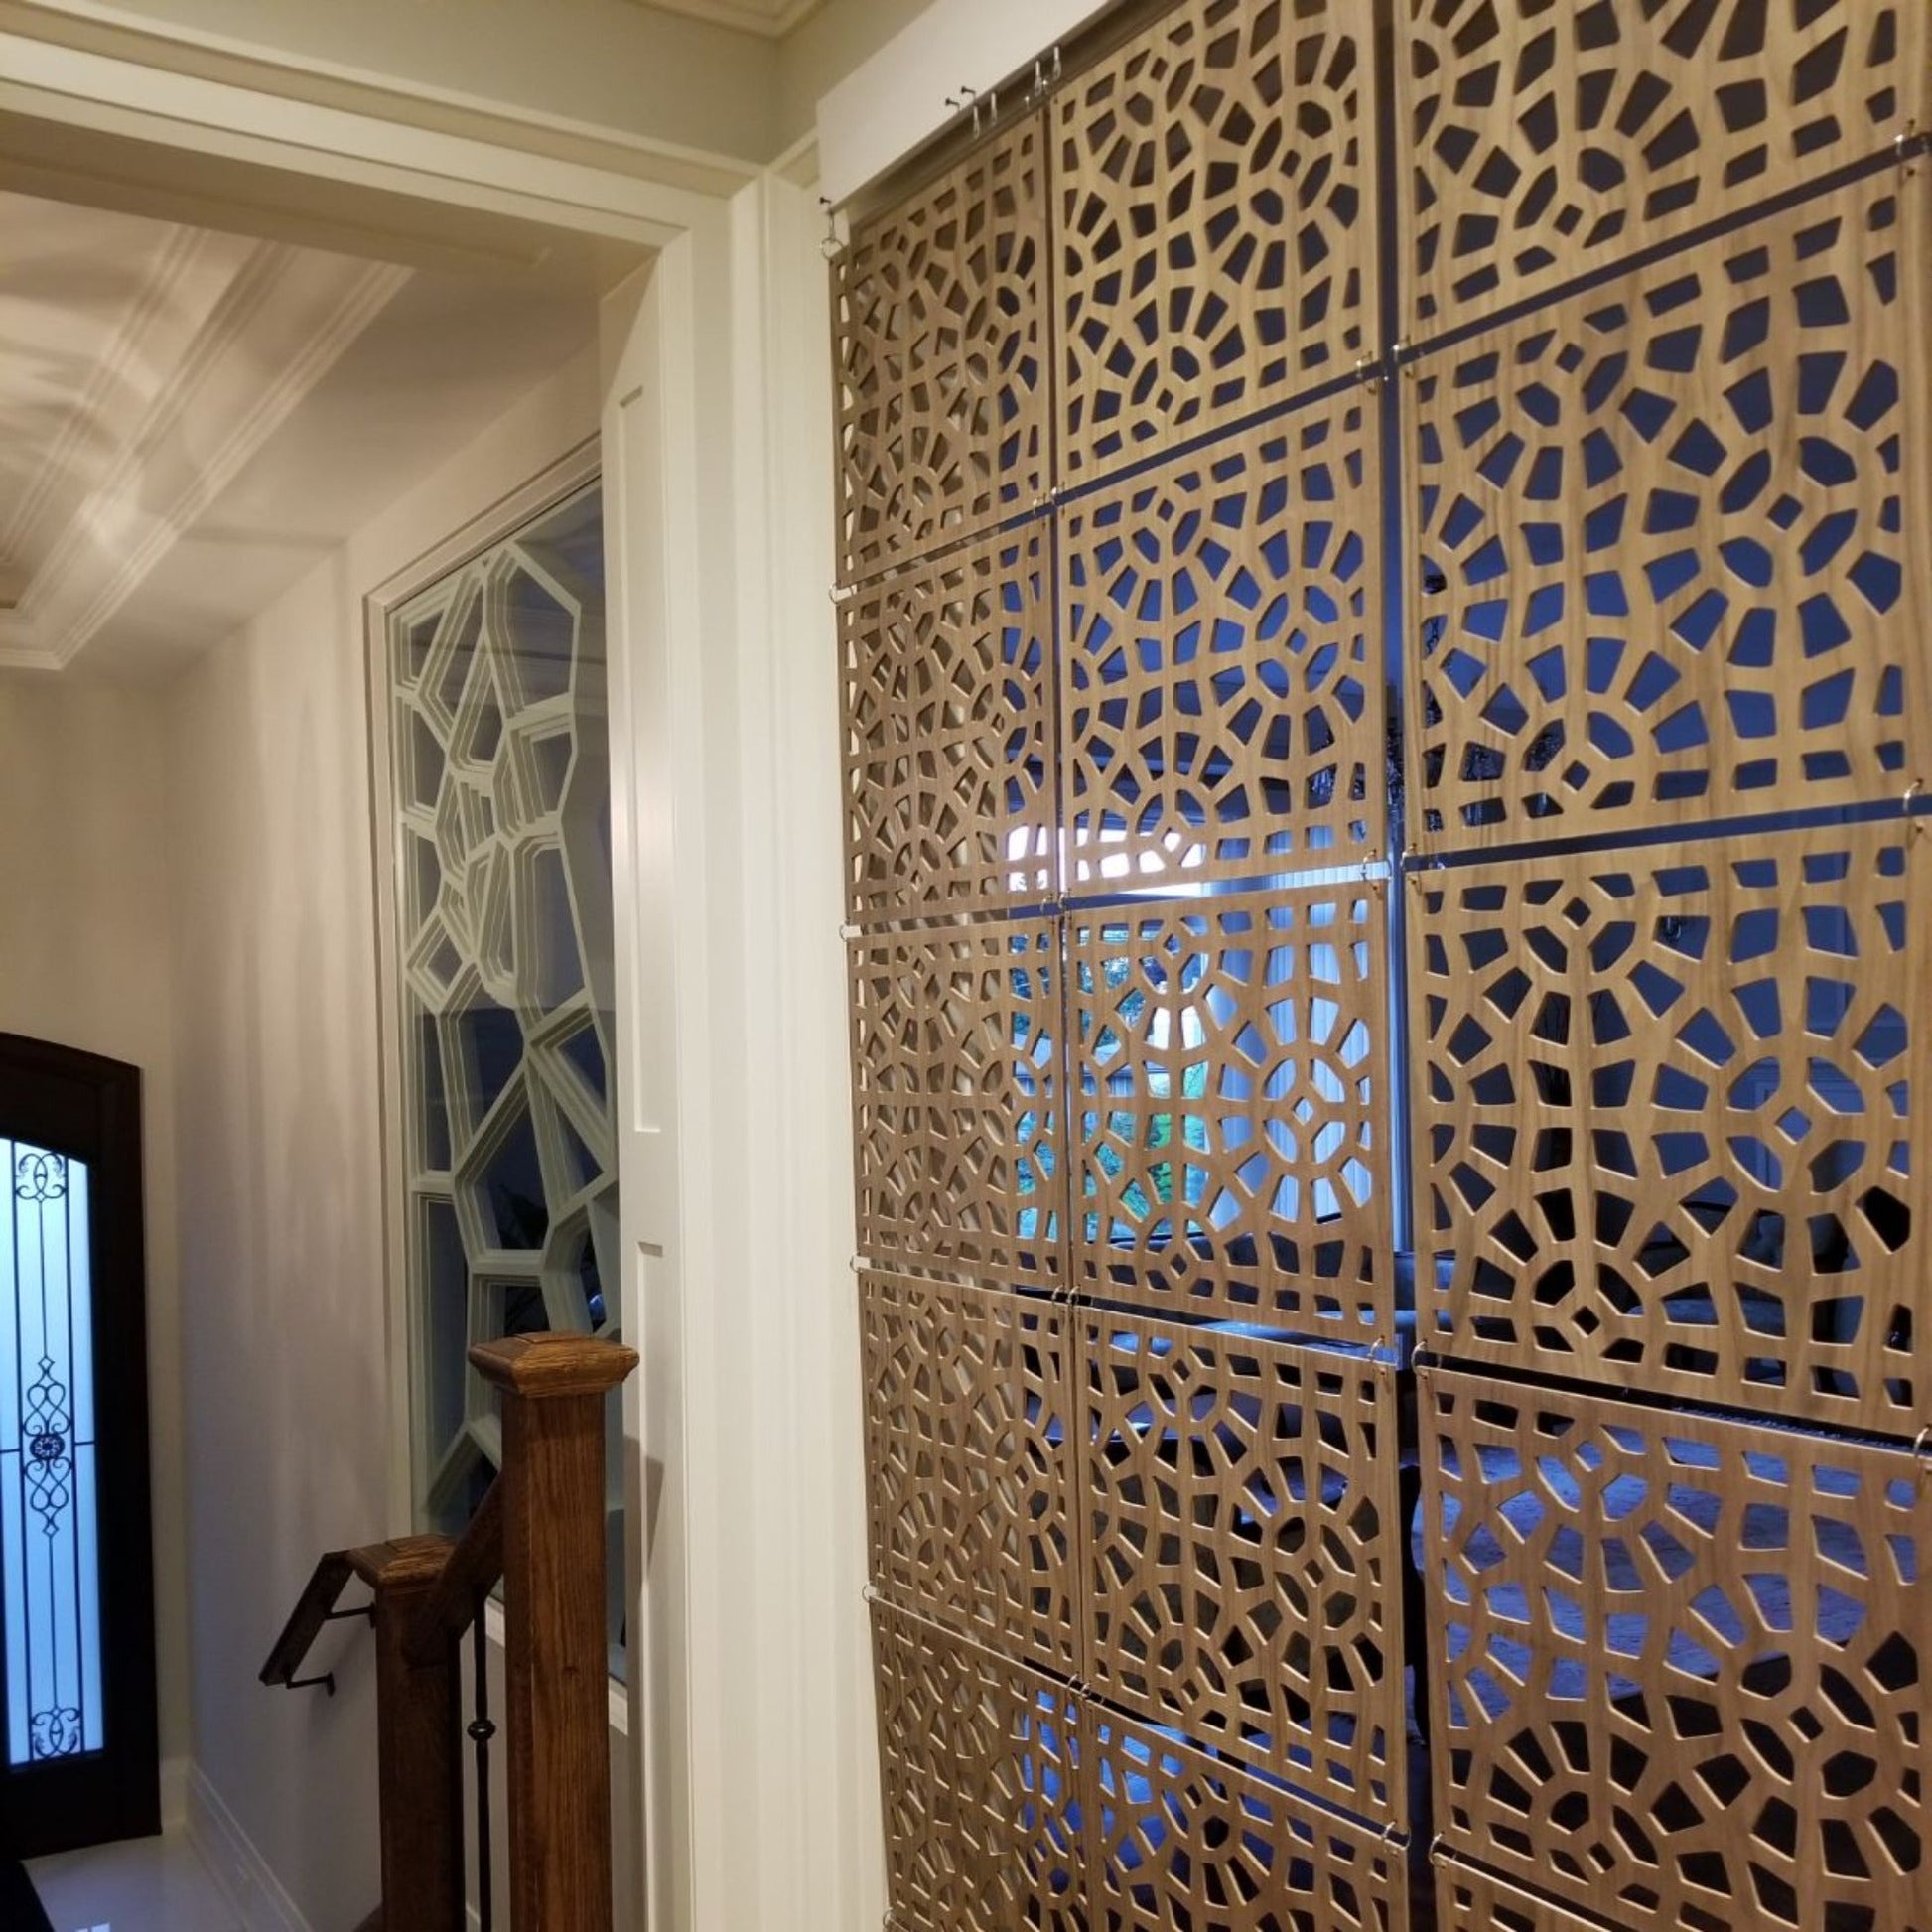 floor-to-ceiling hanging room dividers, room divider screen, room divider vintage, room divider panels, room divider curtain,room decor aesthetic, Custom Divider sheet, Craftivaart Panels, craftivaart, craftivaart.com, privacy screen